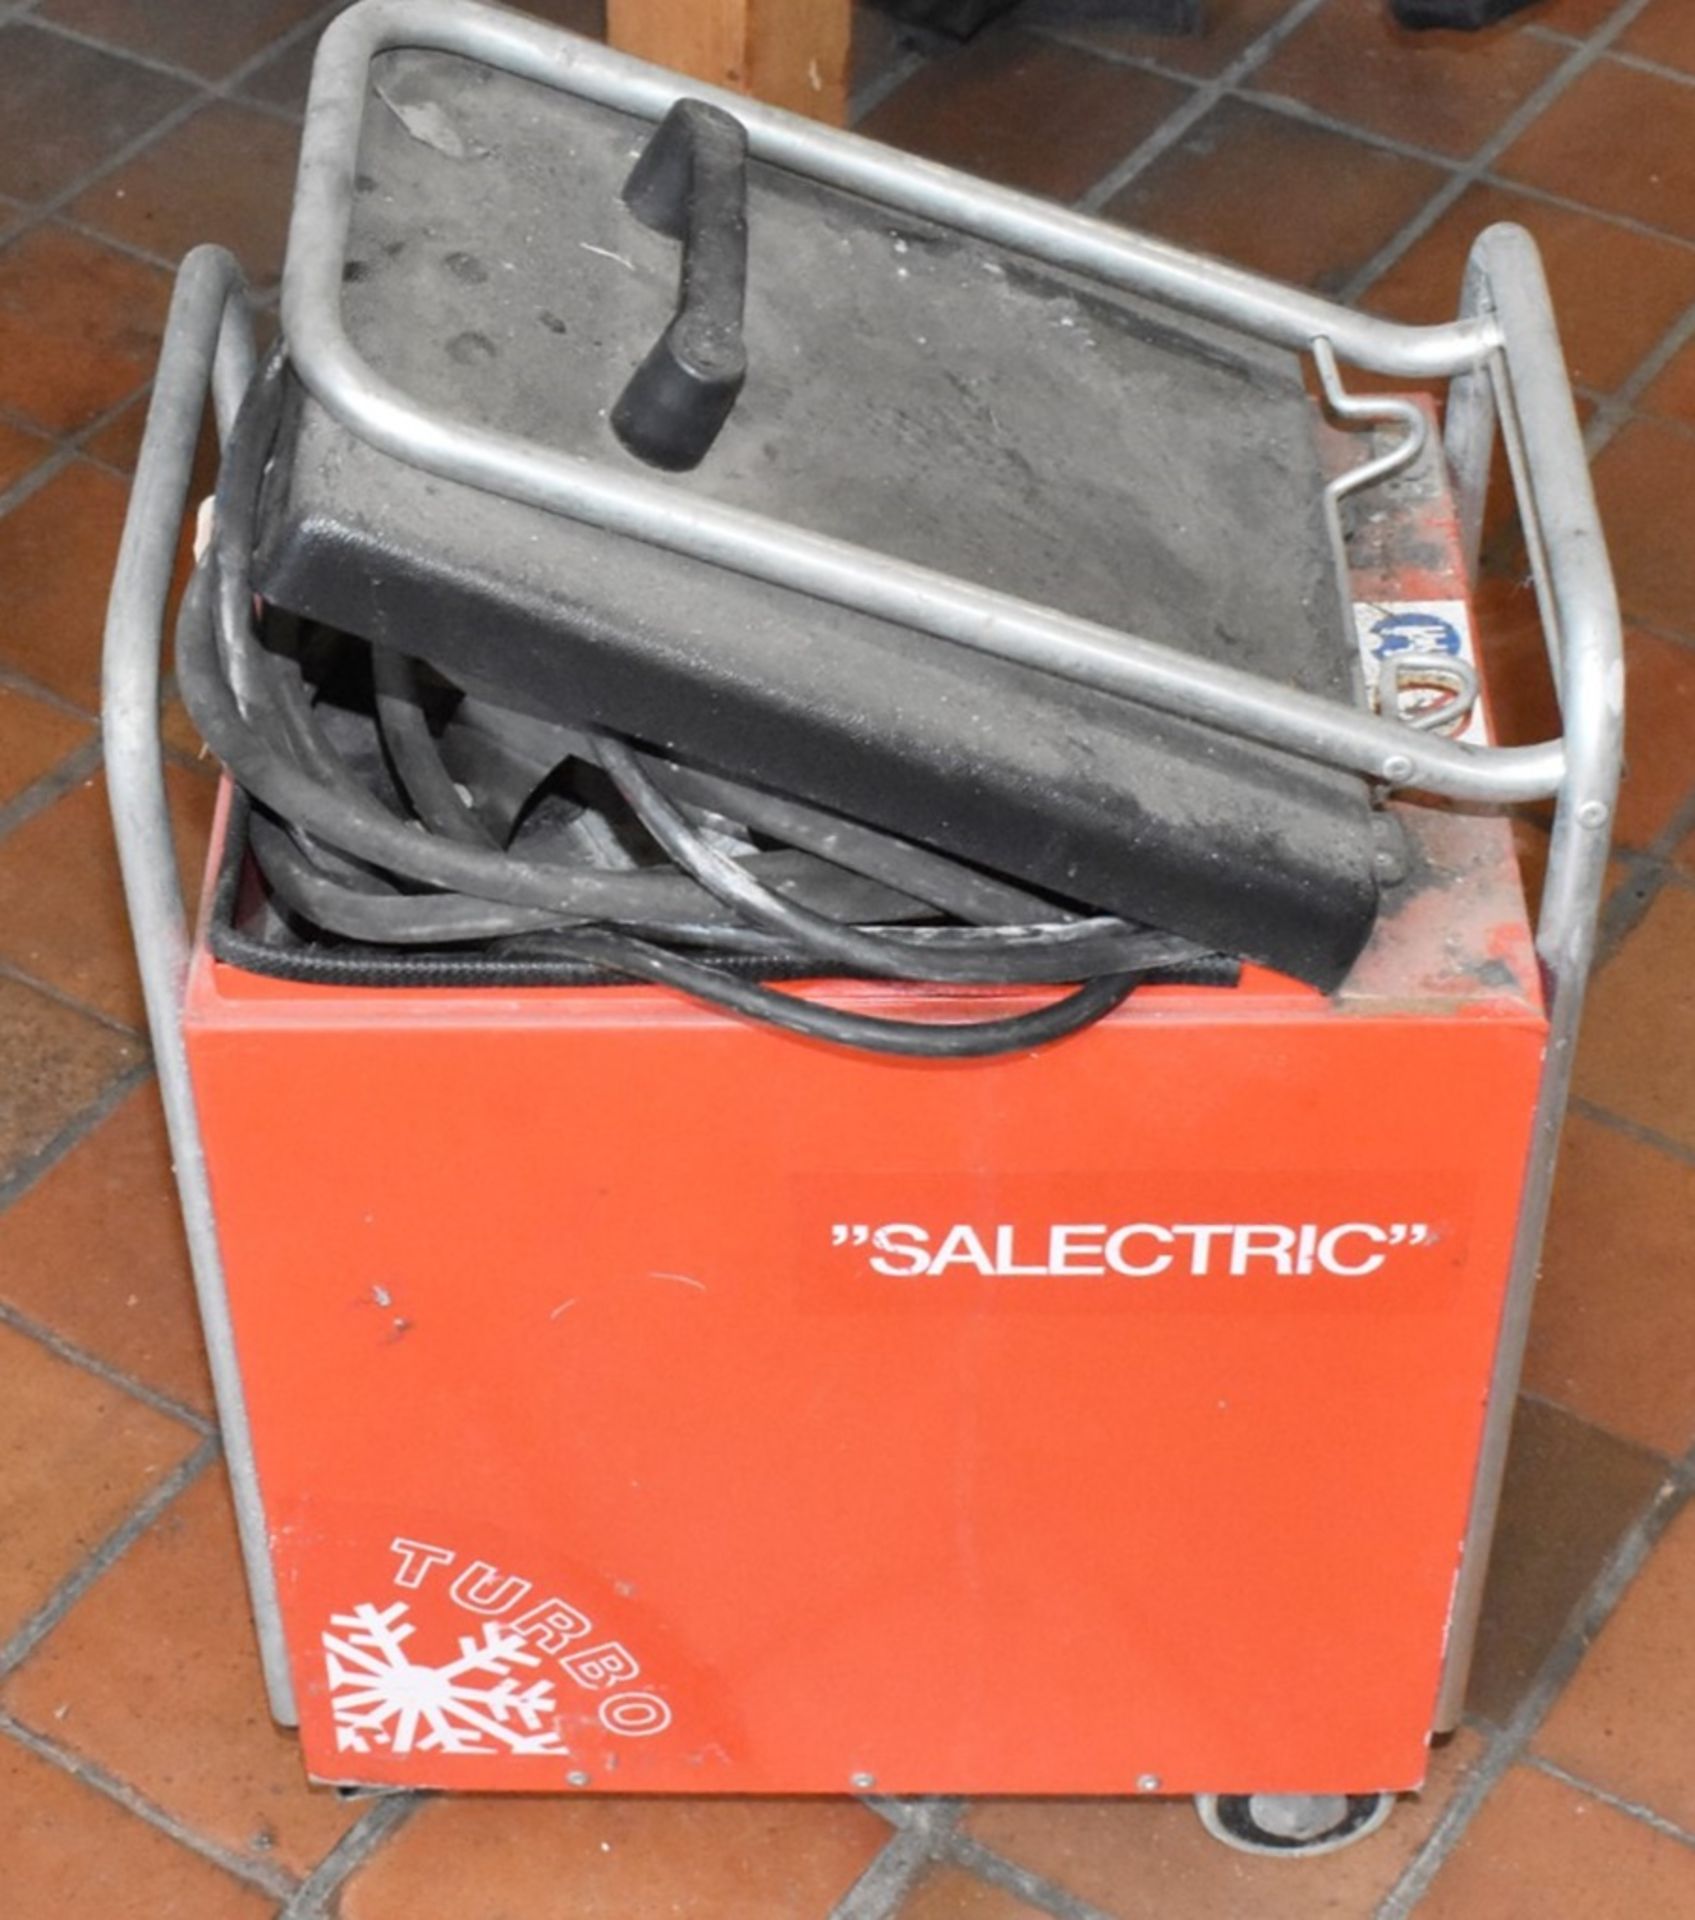 1 x Salectric Turbo Unit on Wheels - Unknown Industrial Tool Device - Image 3 of 5